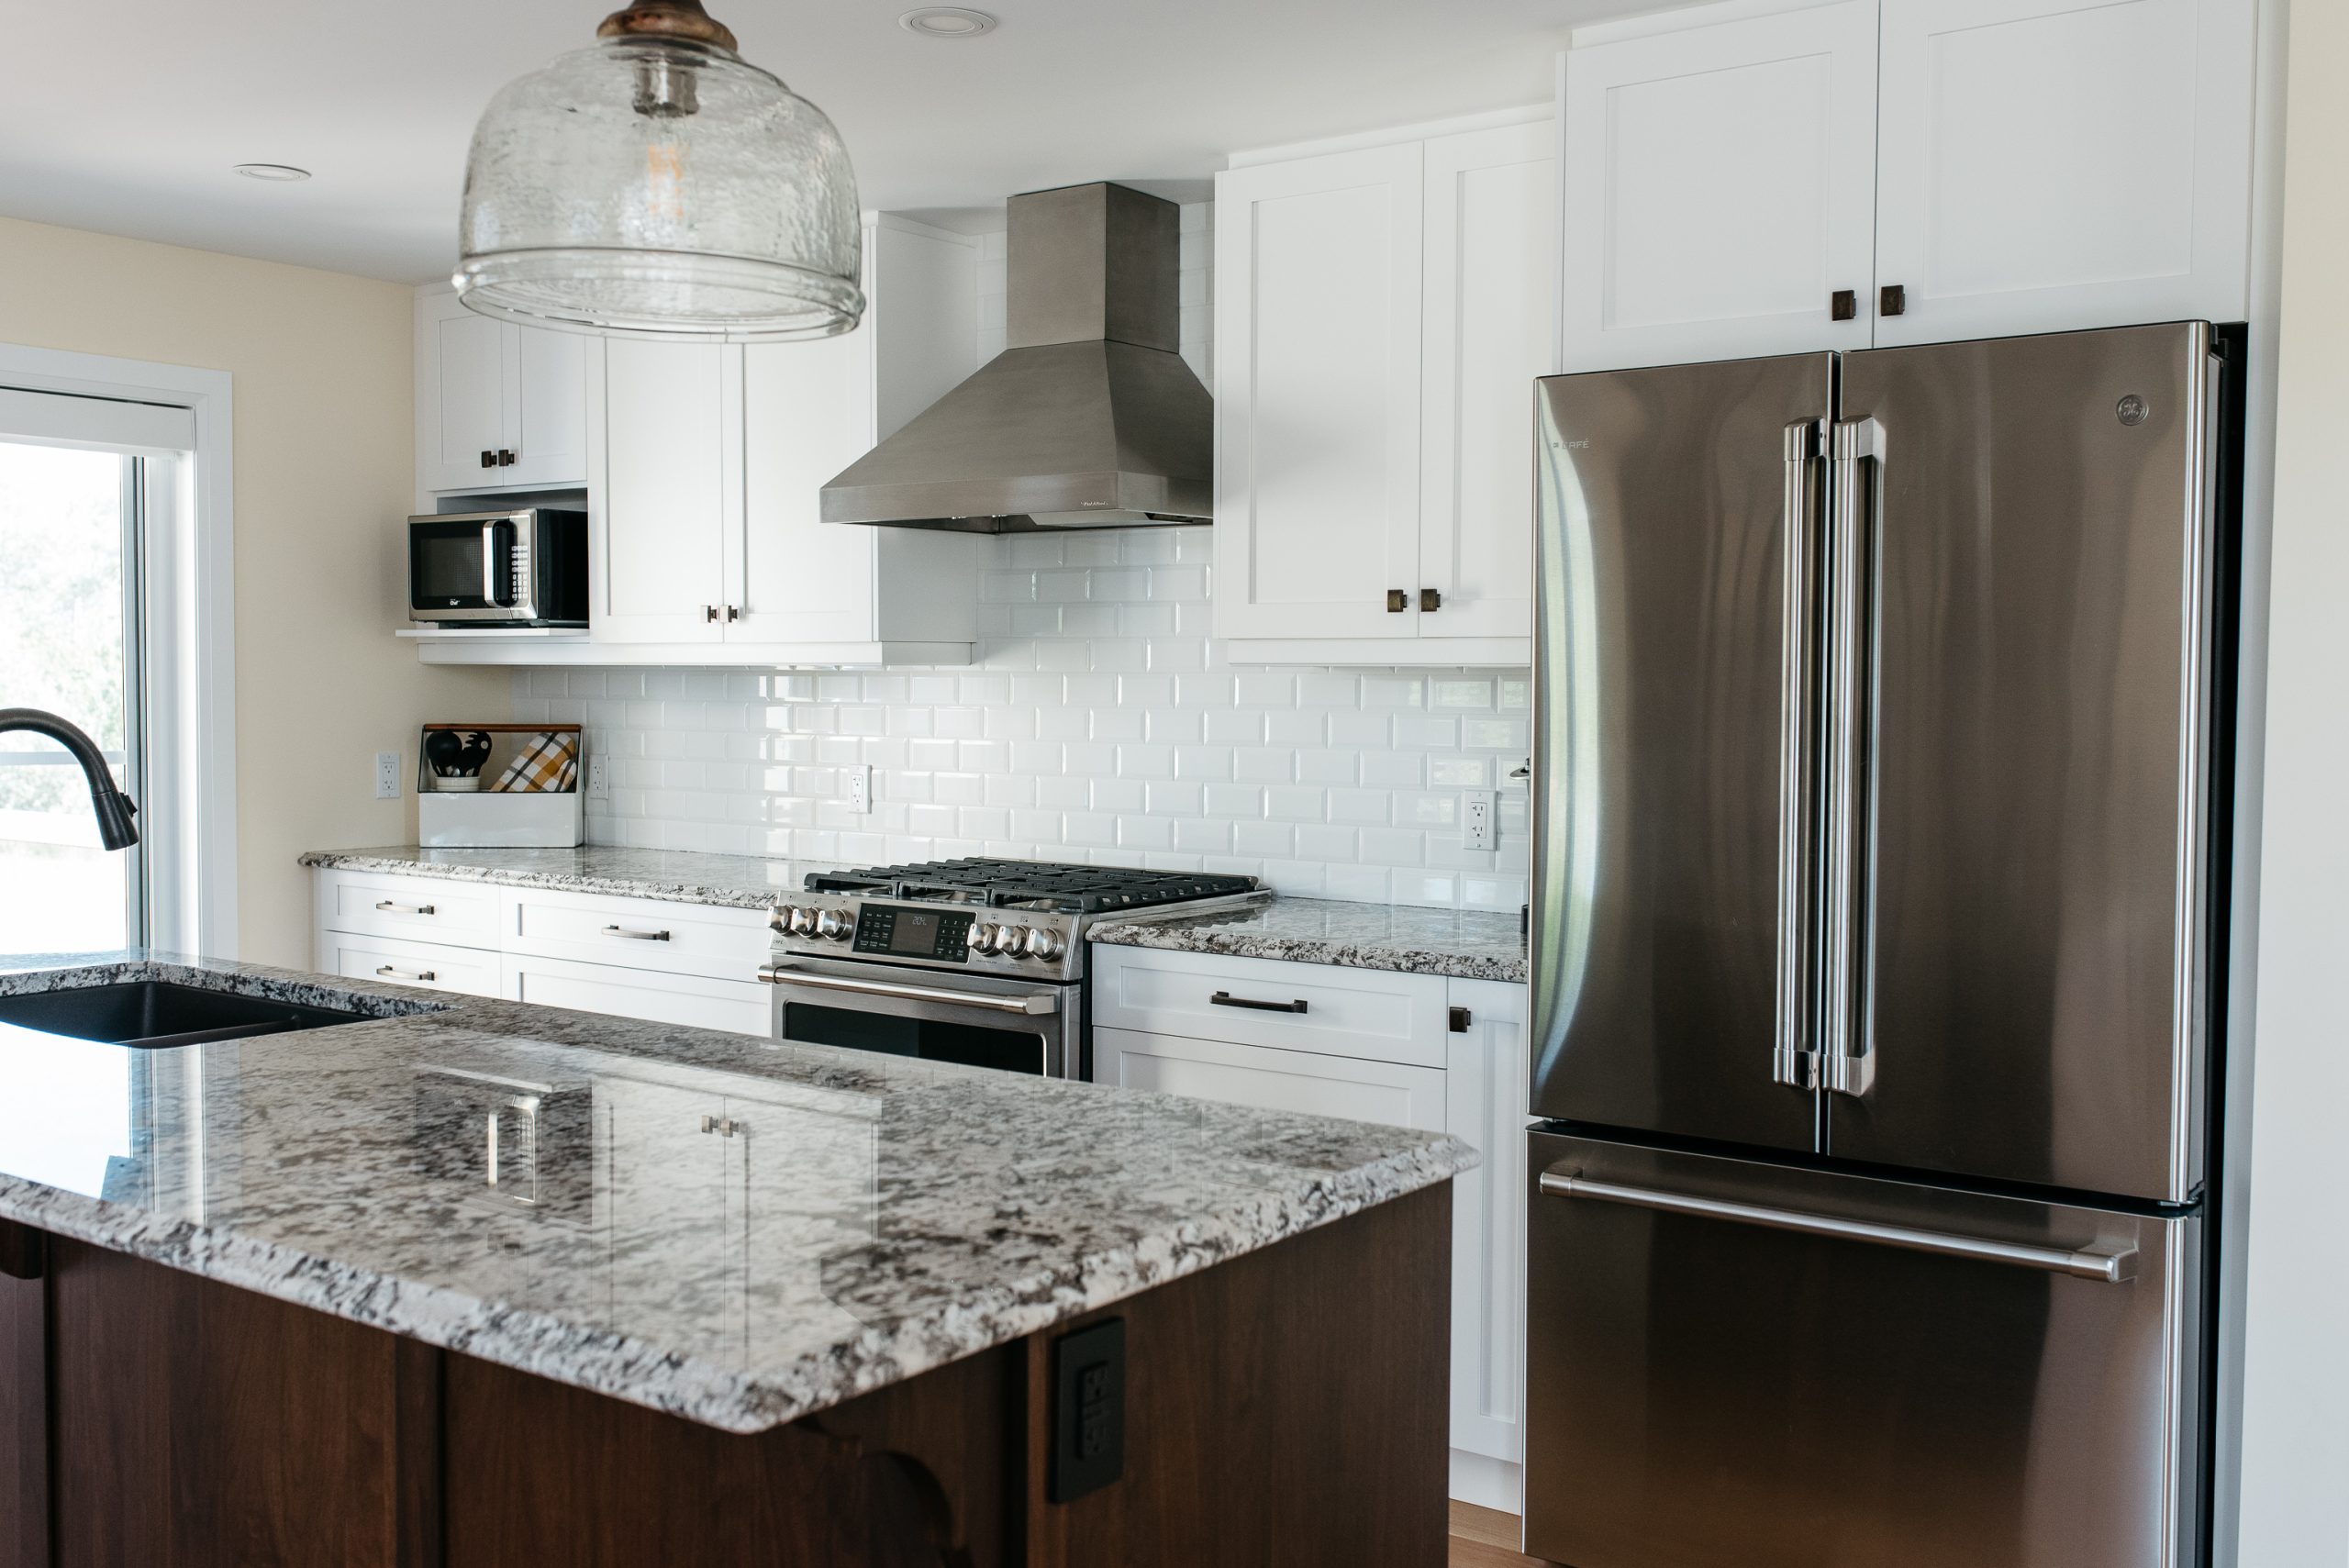 A gorgeous open-concept kitchen remodel featuring custom cabinetry and island by SSP Cabinetry and Millwork